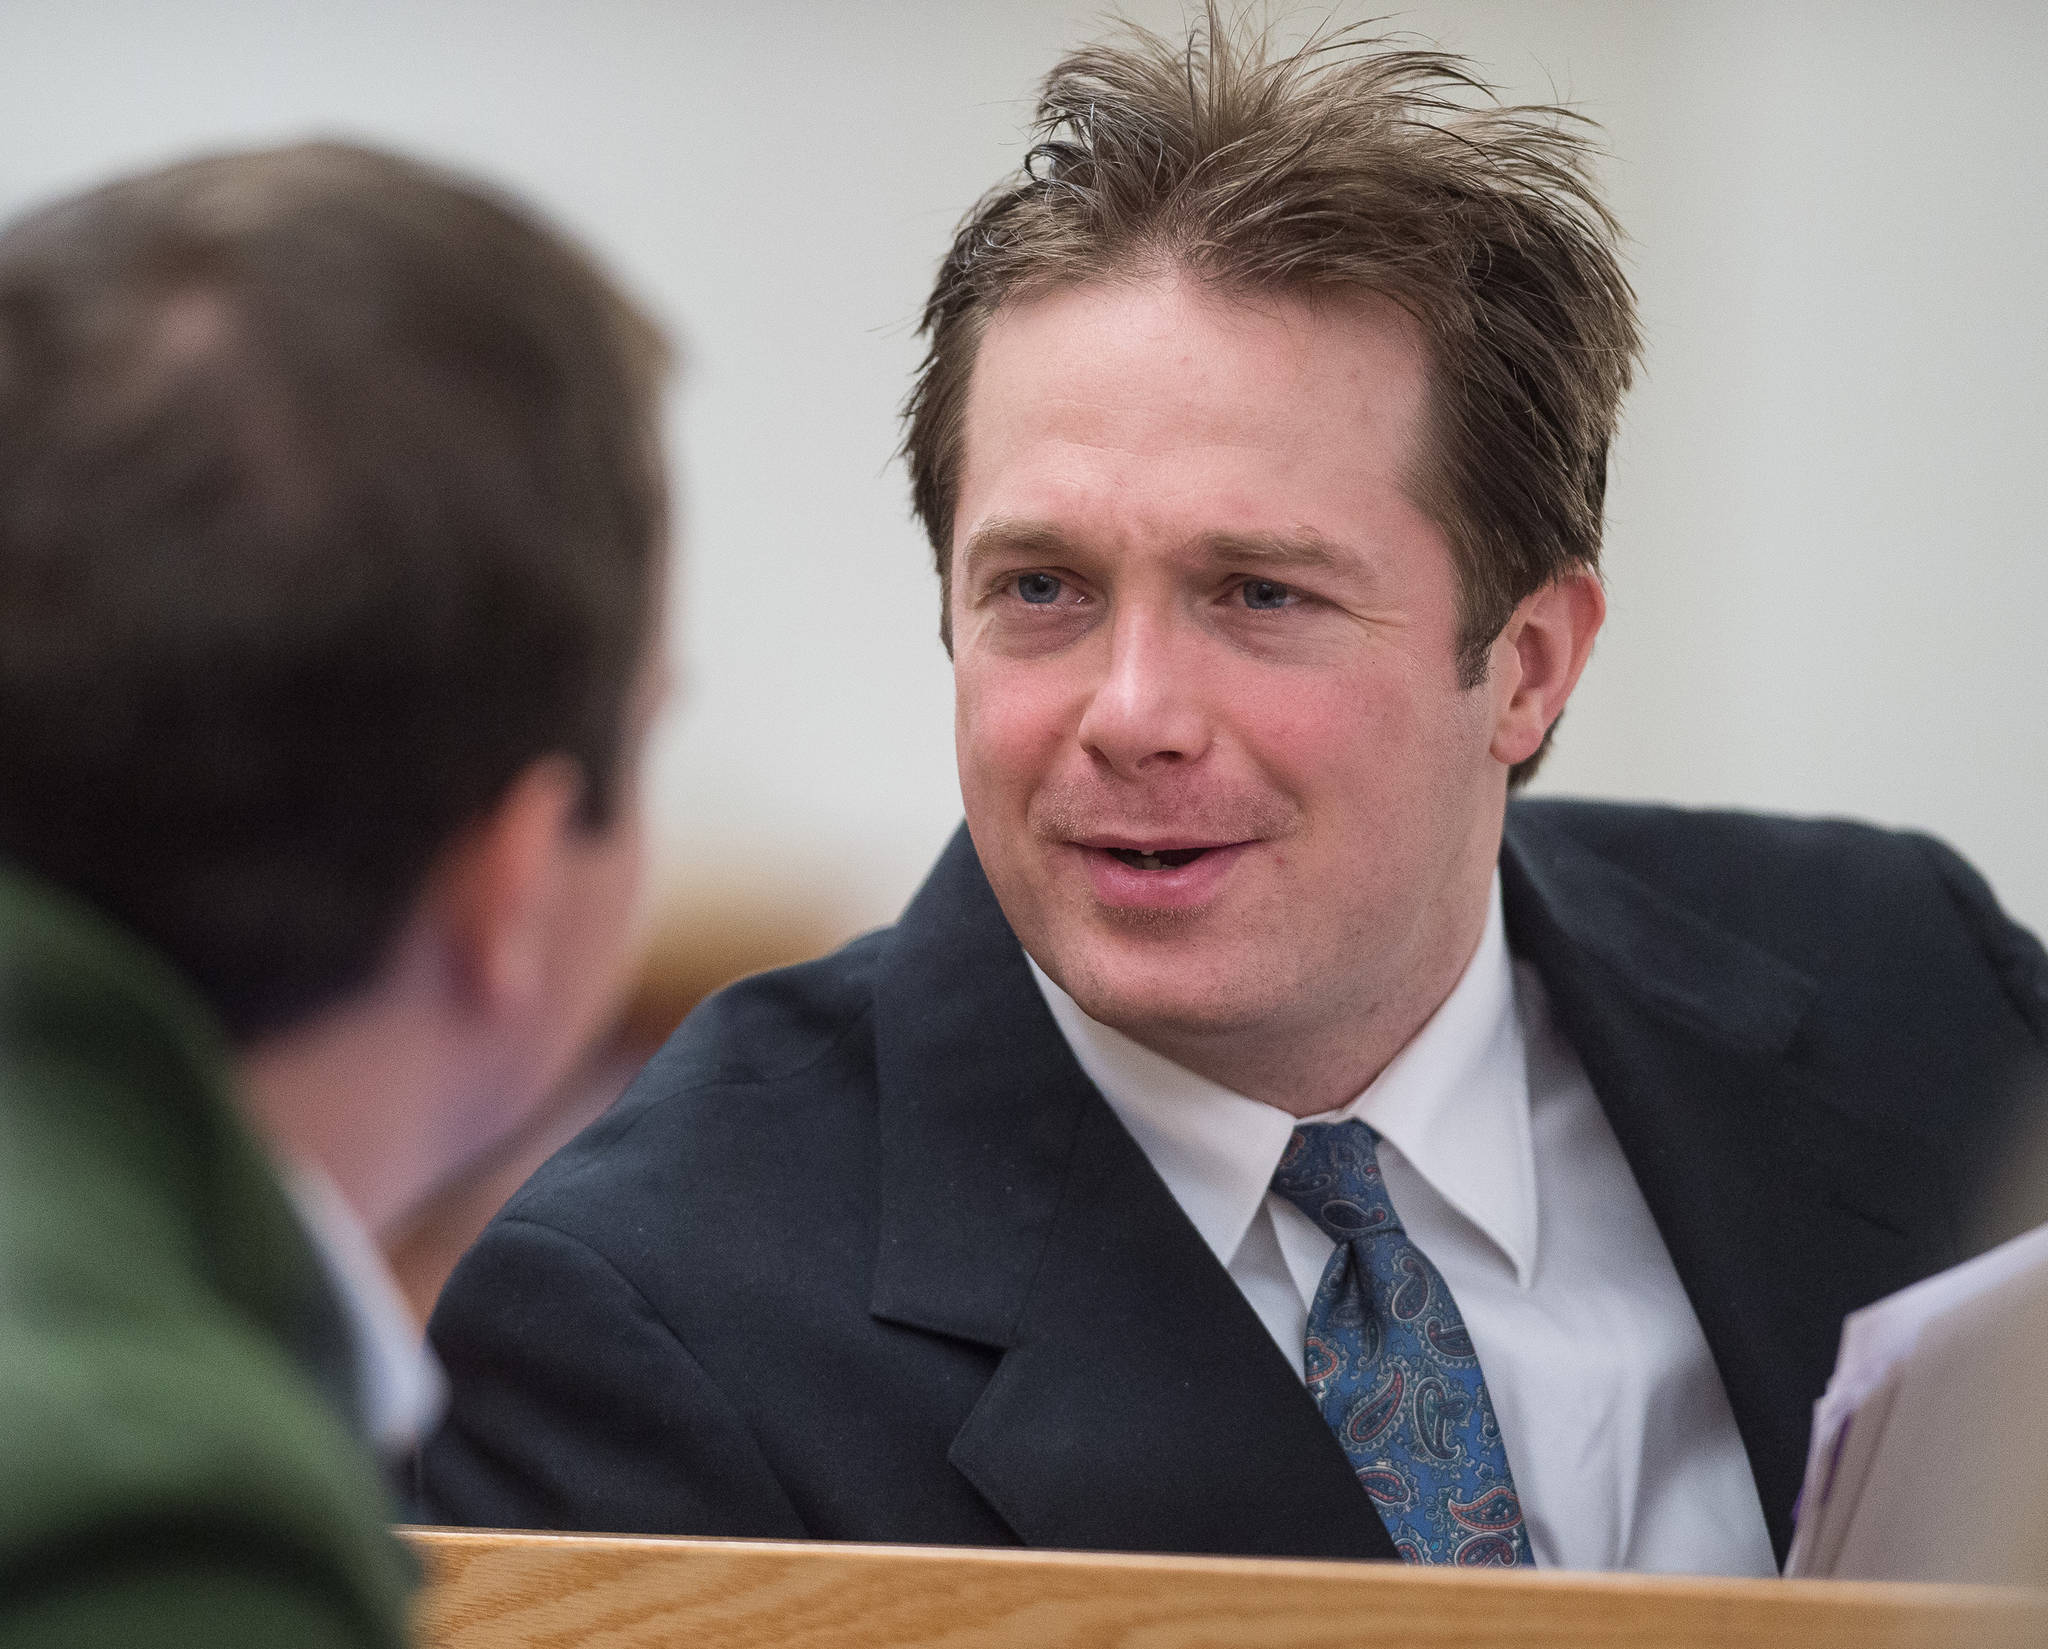 Christopher Strawn, right, confers with criminal defense attorney Nicholas Polasky during his trial in Juneau Superior Court on Wednesday, Oct. 11, 2017. Strawn, 34, faces charges of first-degree and second-degree murder, manslaughter, criminally negligent homicide, third-degree assault and weapons misconduct in the shooting death of Brandon Cook in October 2015. (Michael Penn | Juneau Empire)